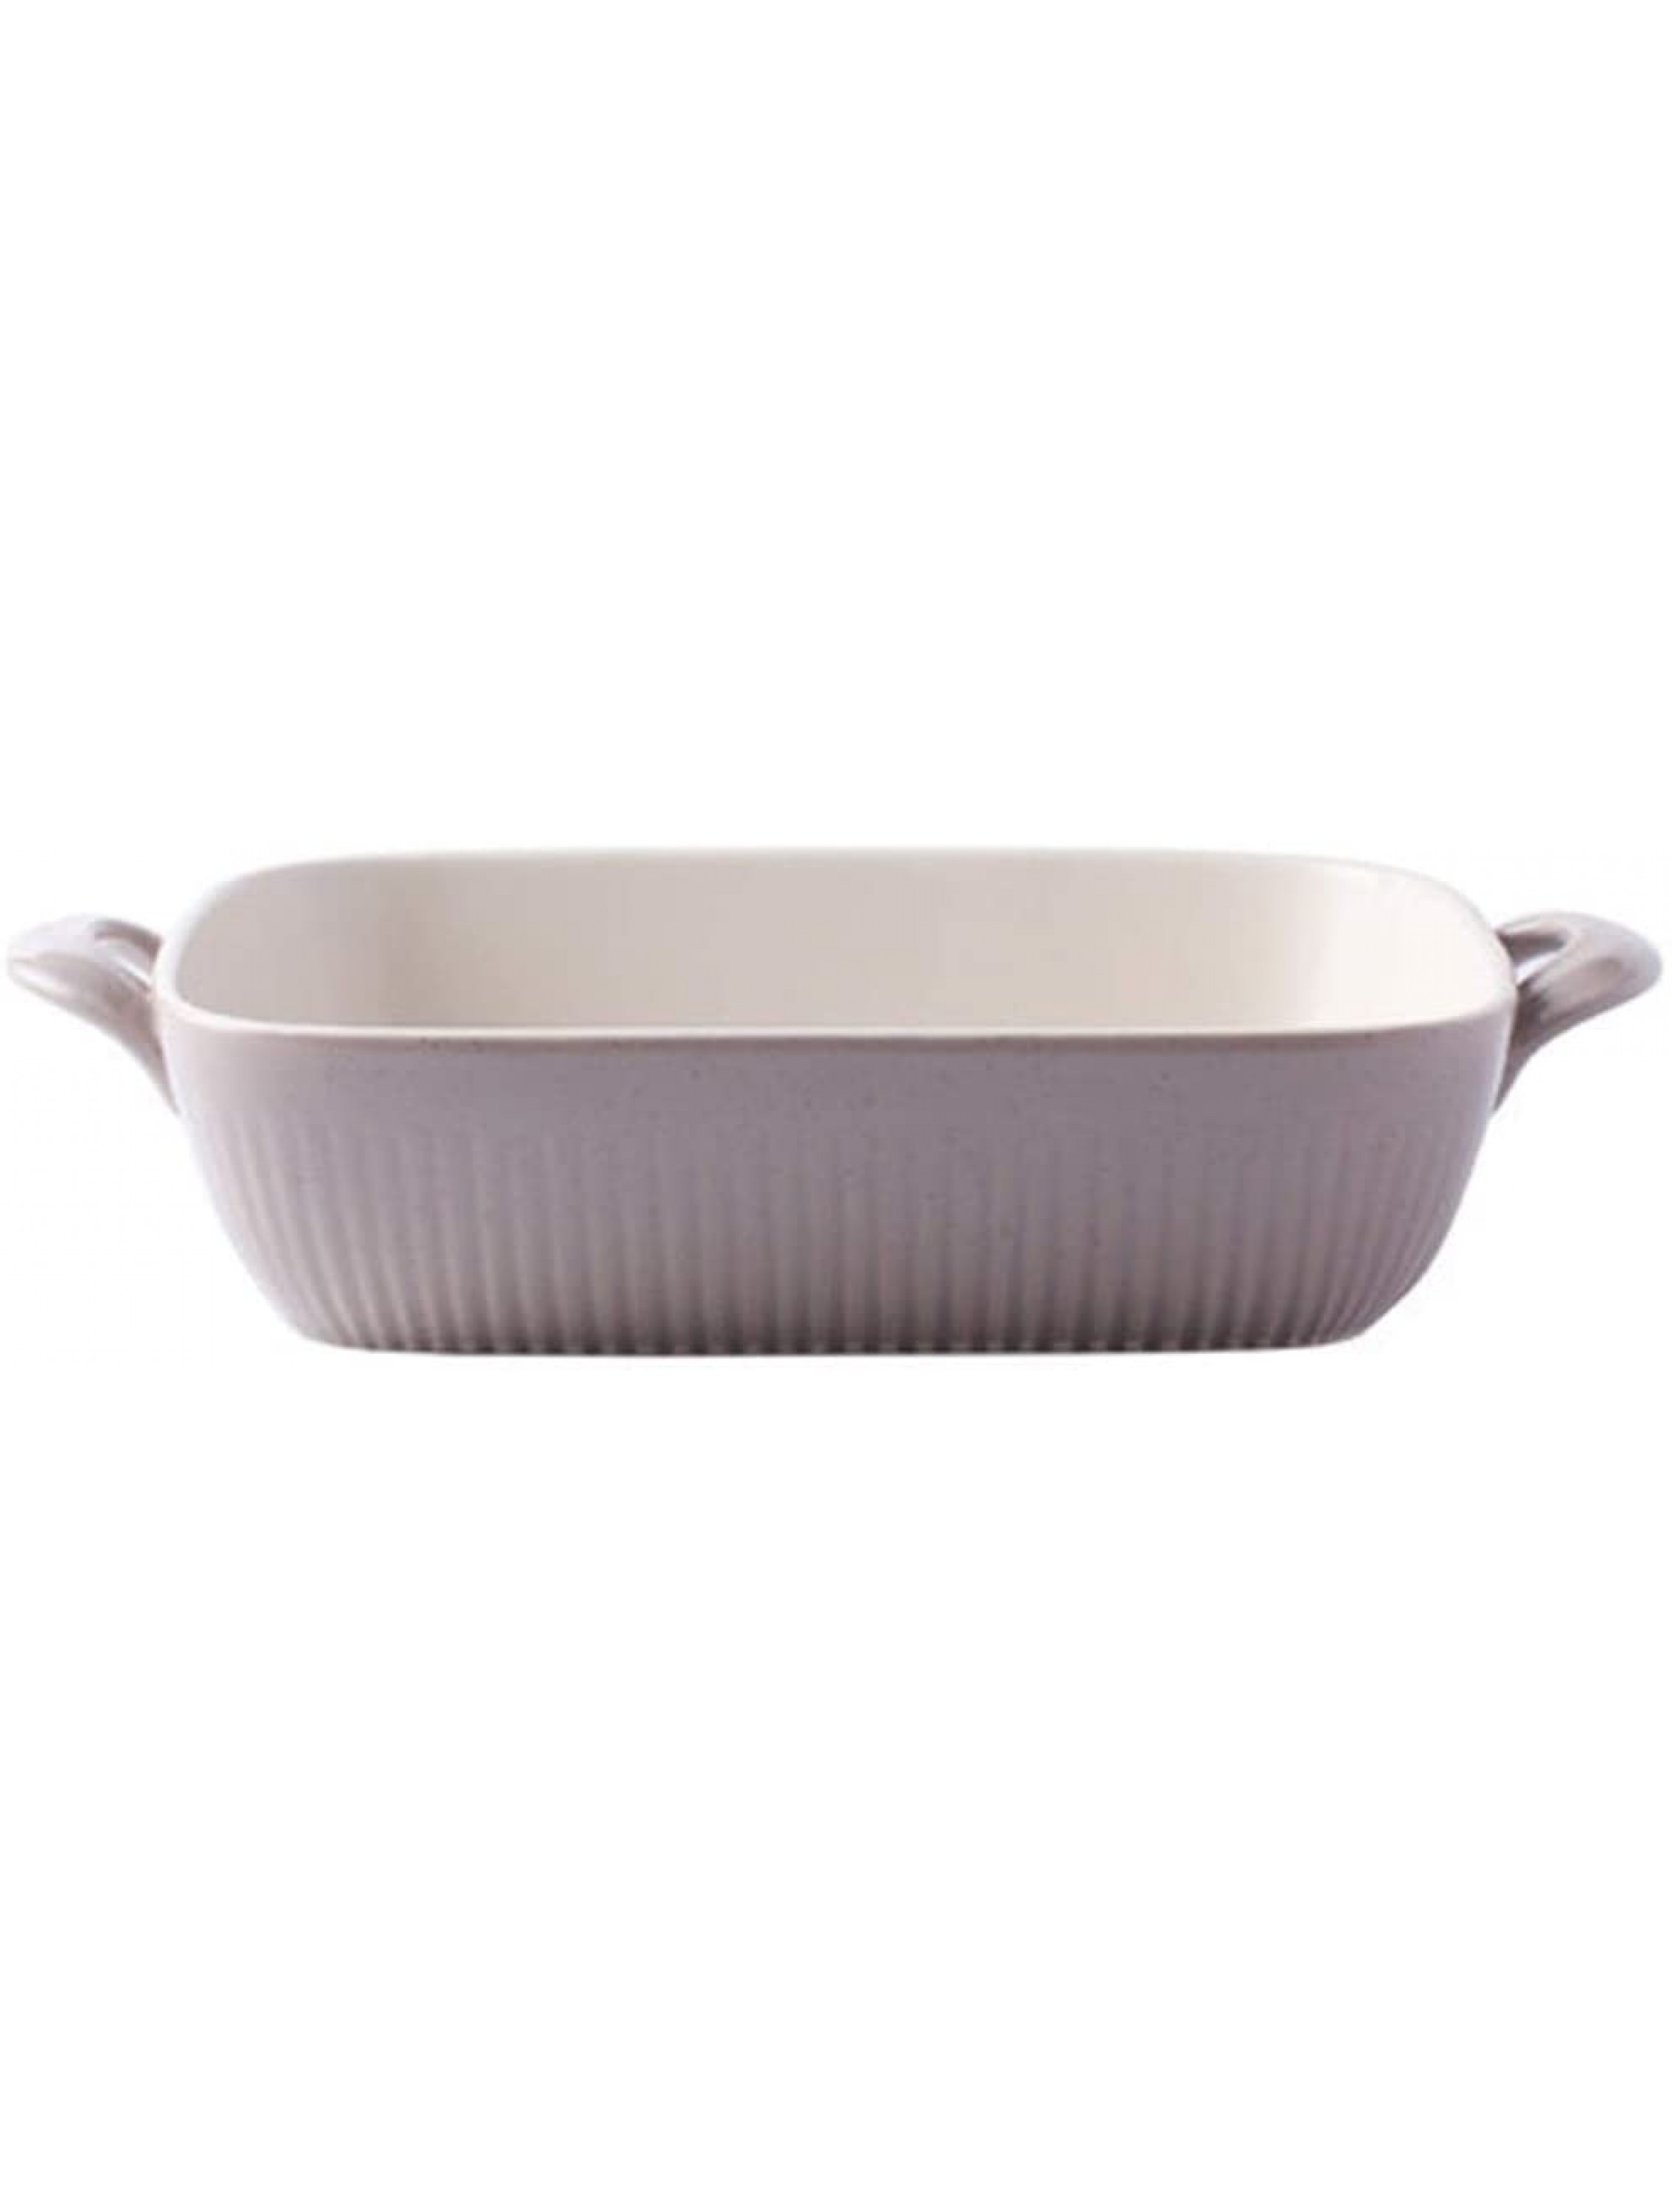 Multi Baker Dish Glaze Creative Double Ear Handle Fish Dish Easy To Clean Ceramic Bakeware Durable Porcelain Baking Dish Multifunction For Cooking Kitchen Baking Pan Color : Gray Size : 11 inch - BR62A1DNC